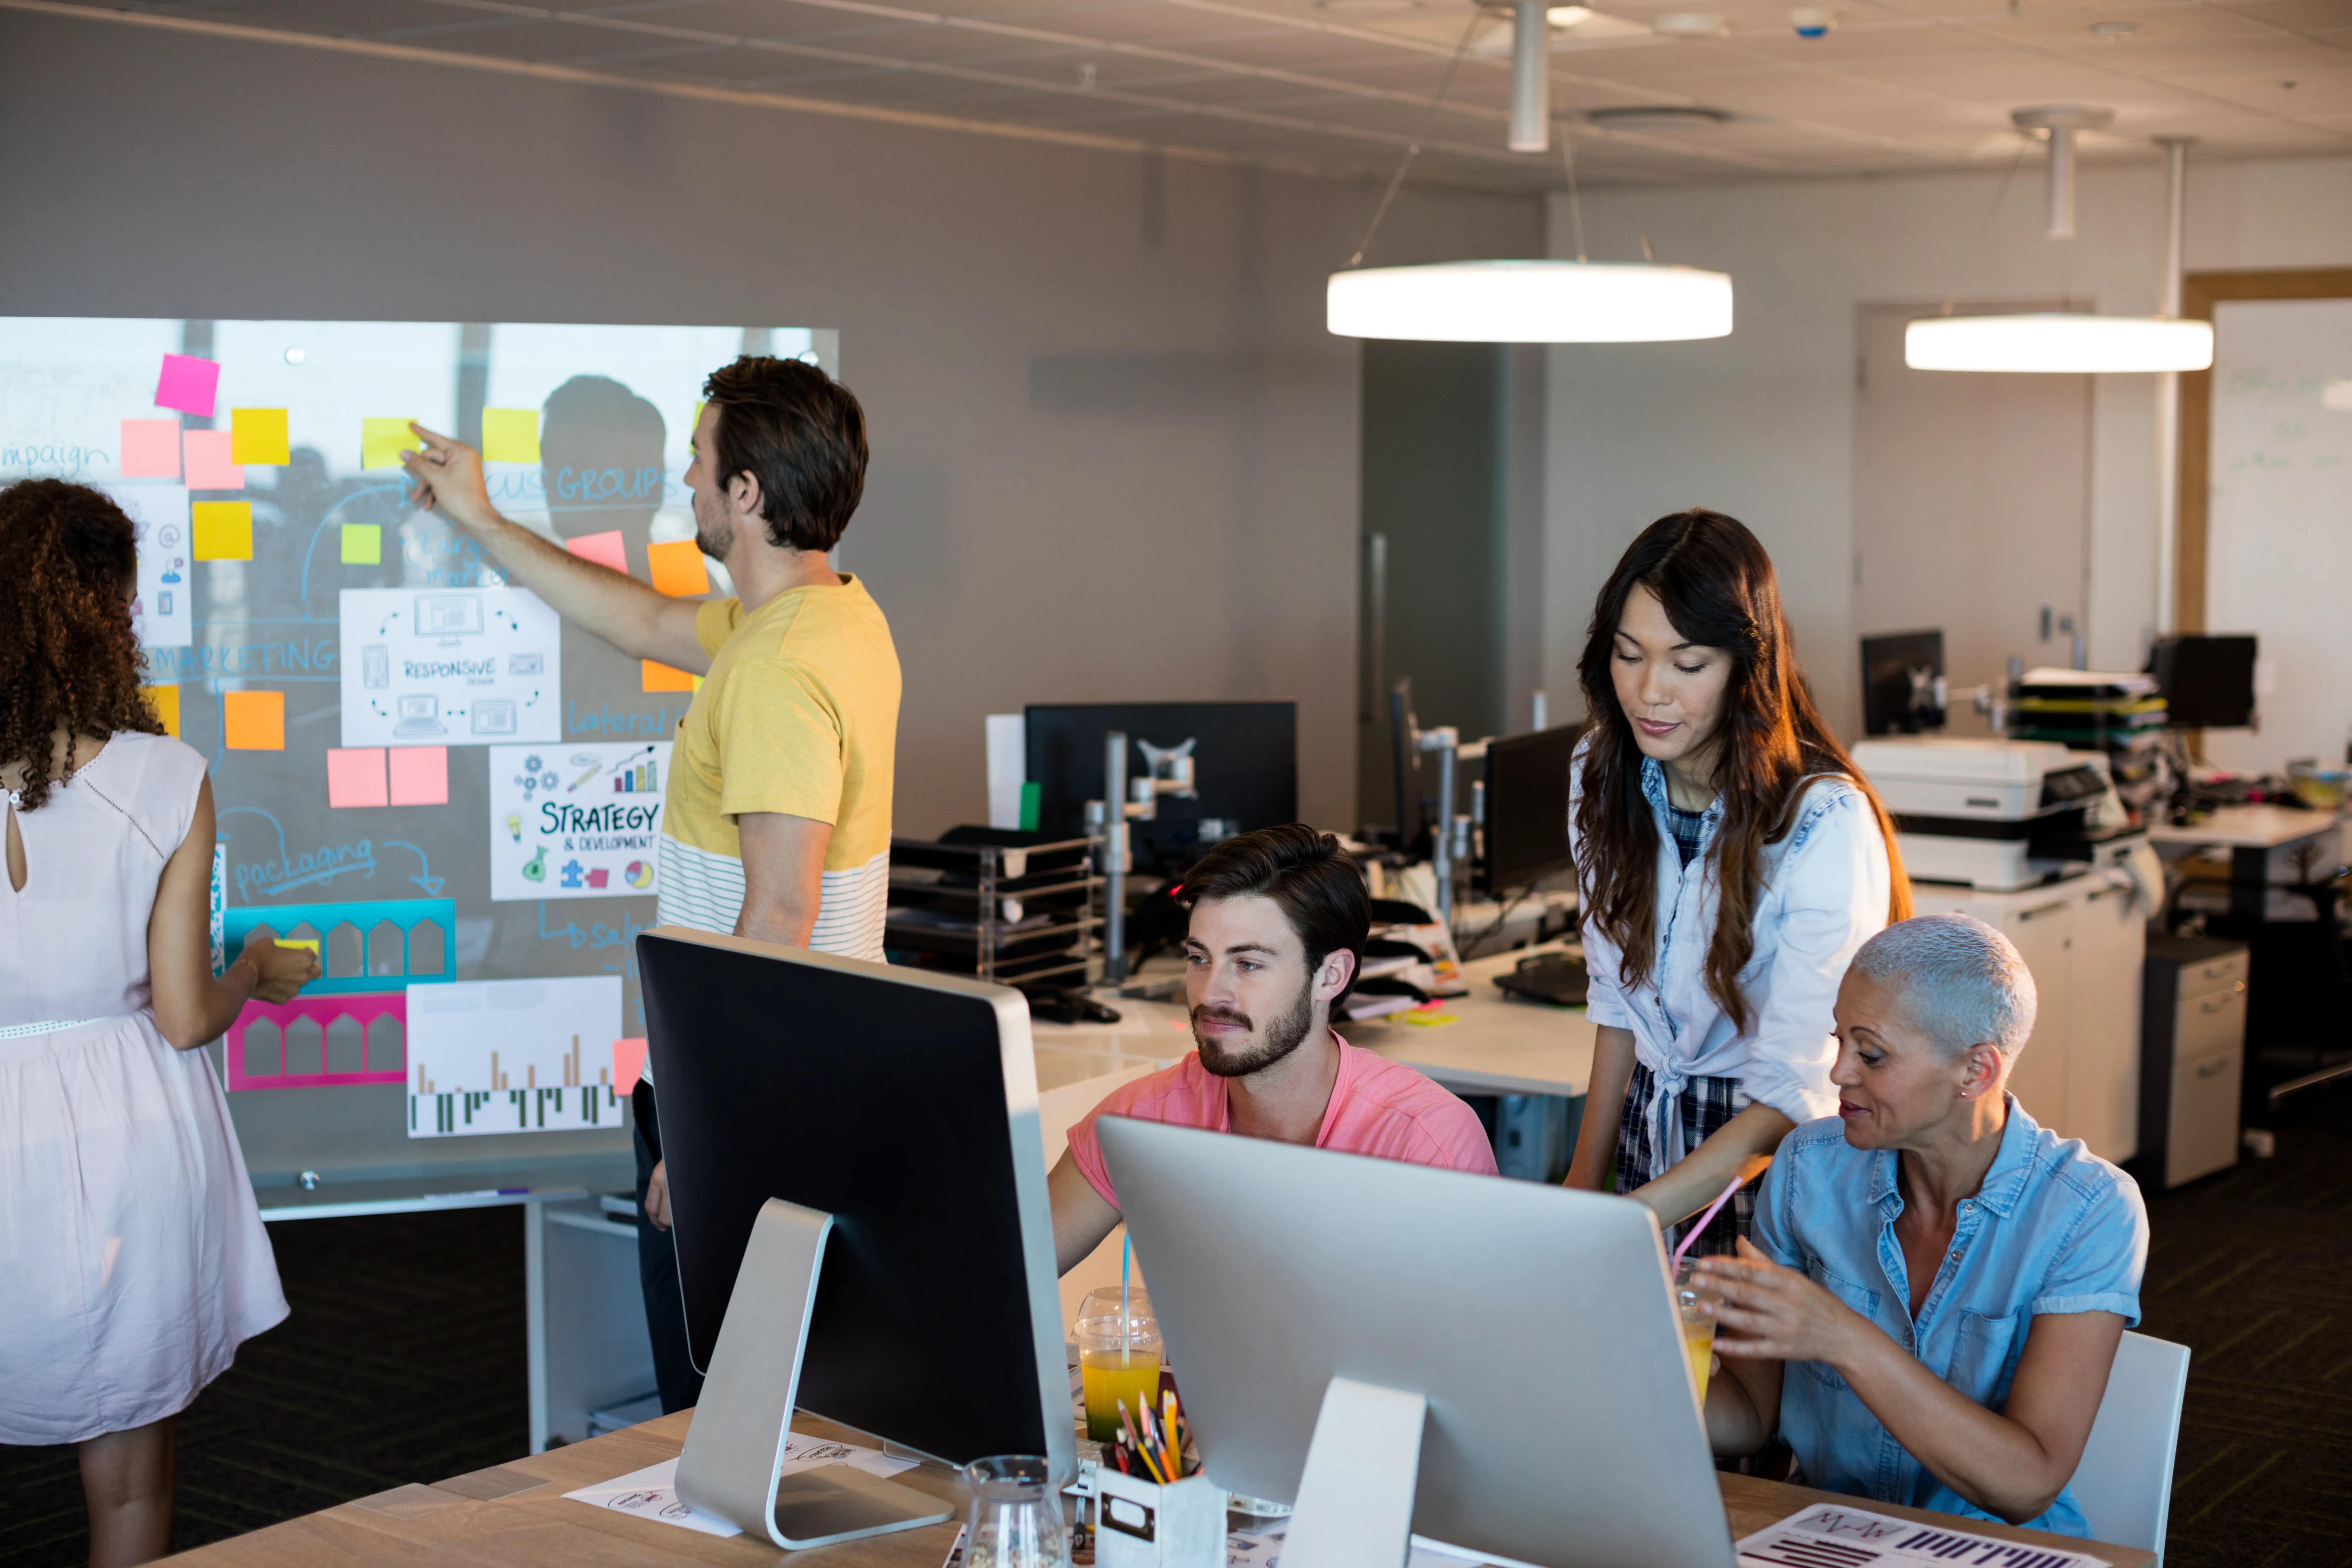 A diverse creative business team actively engaged in a strategy session with one member pointing at sticky notes on a whiteboard, in a dynamic office workspace.